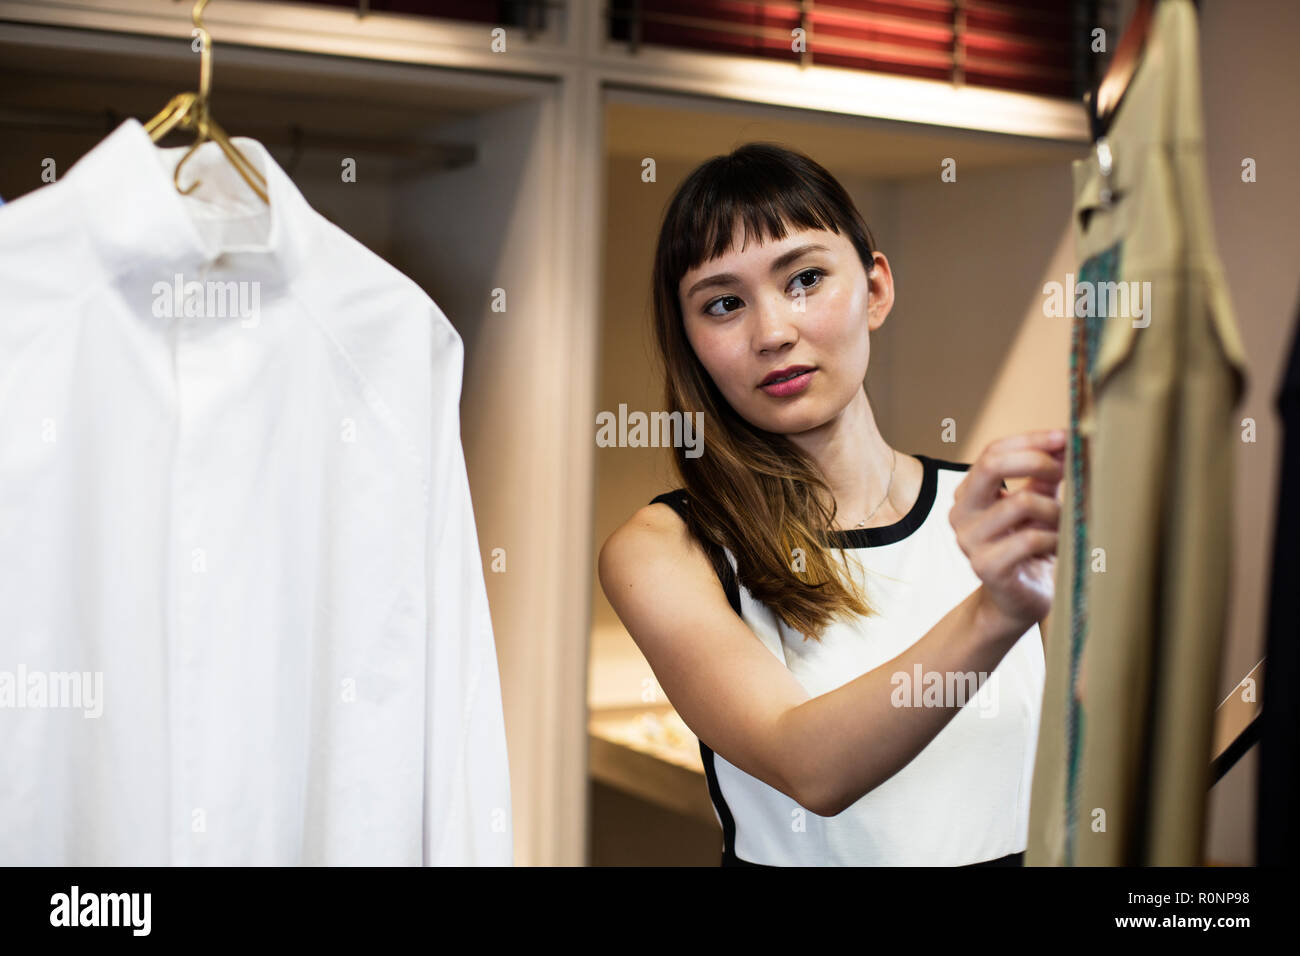 Japanese saleswoman standing in clothing store, looking at shirt. Stock Photo